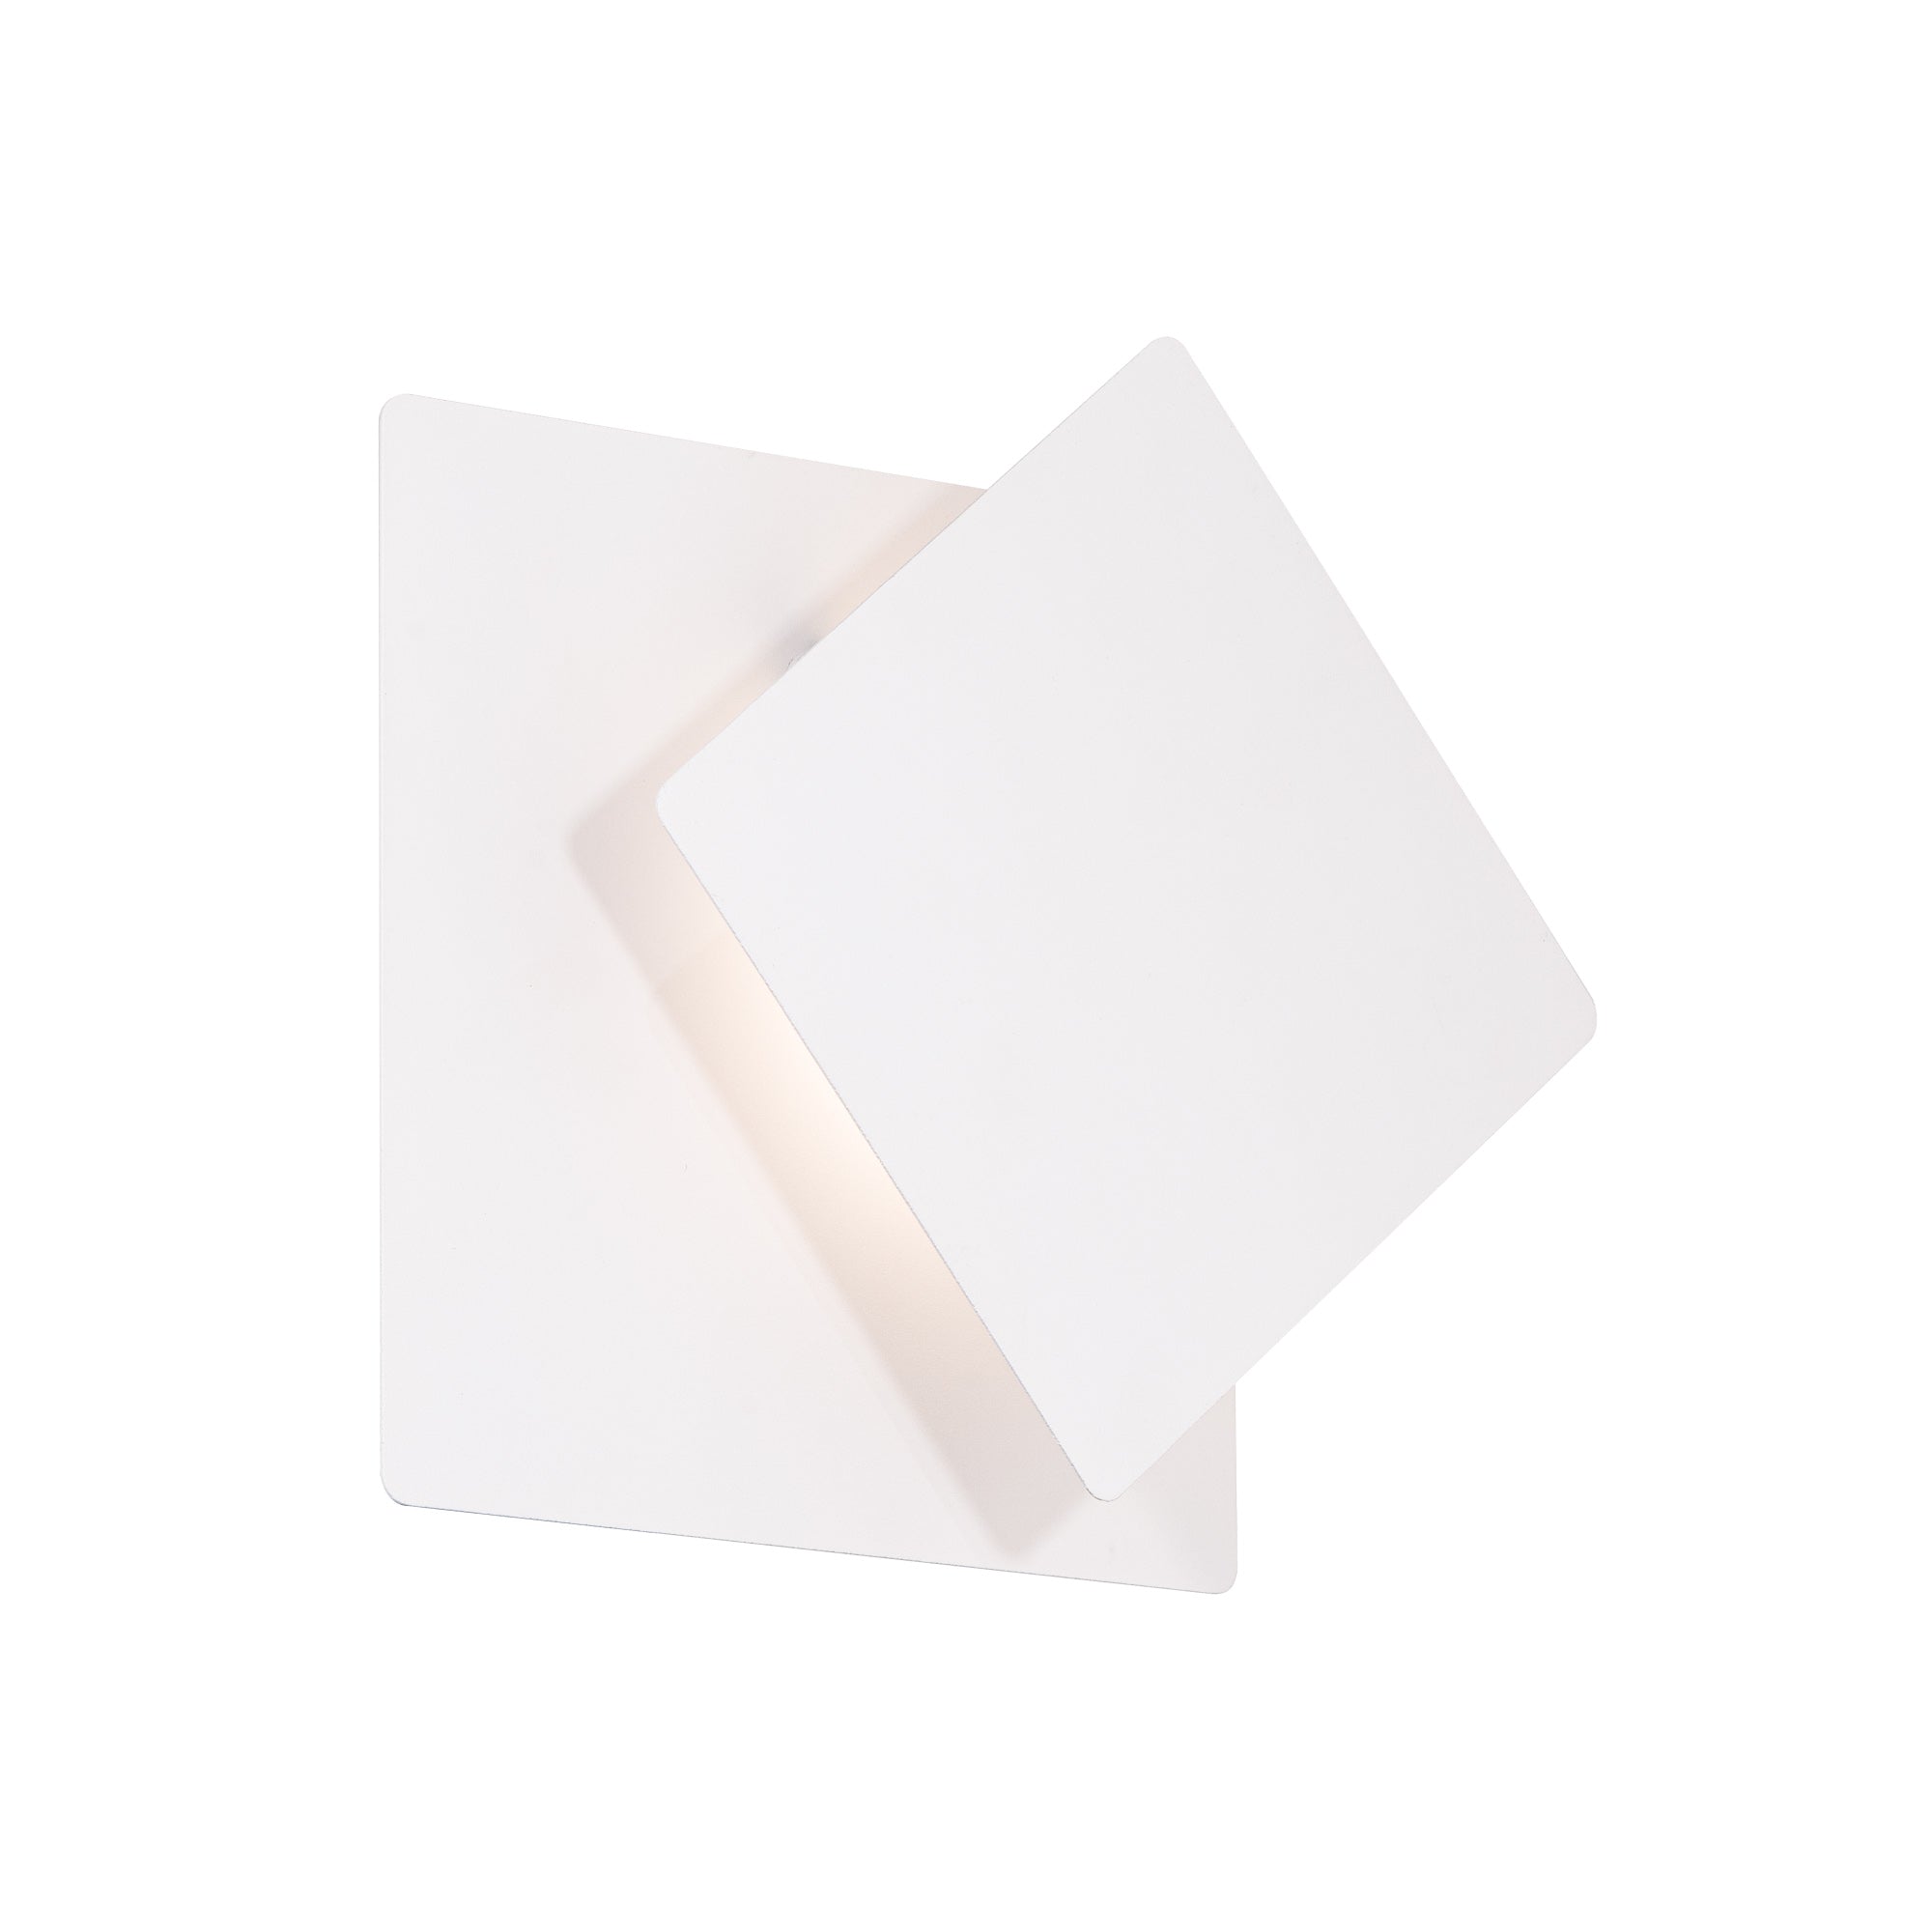 Greet 7" LED Wall Sconce